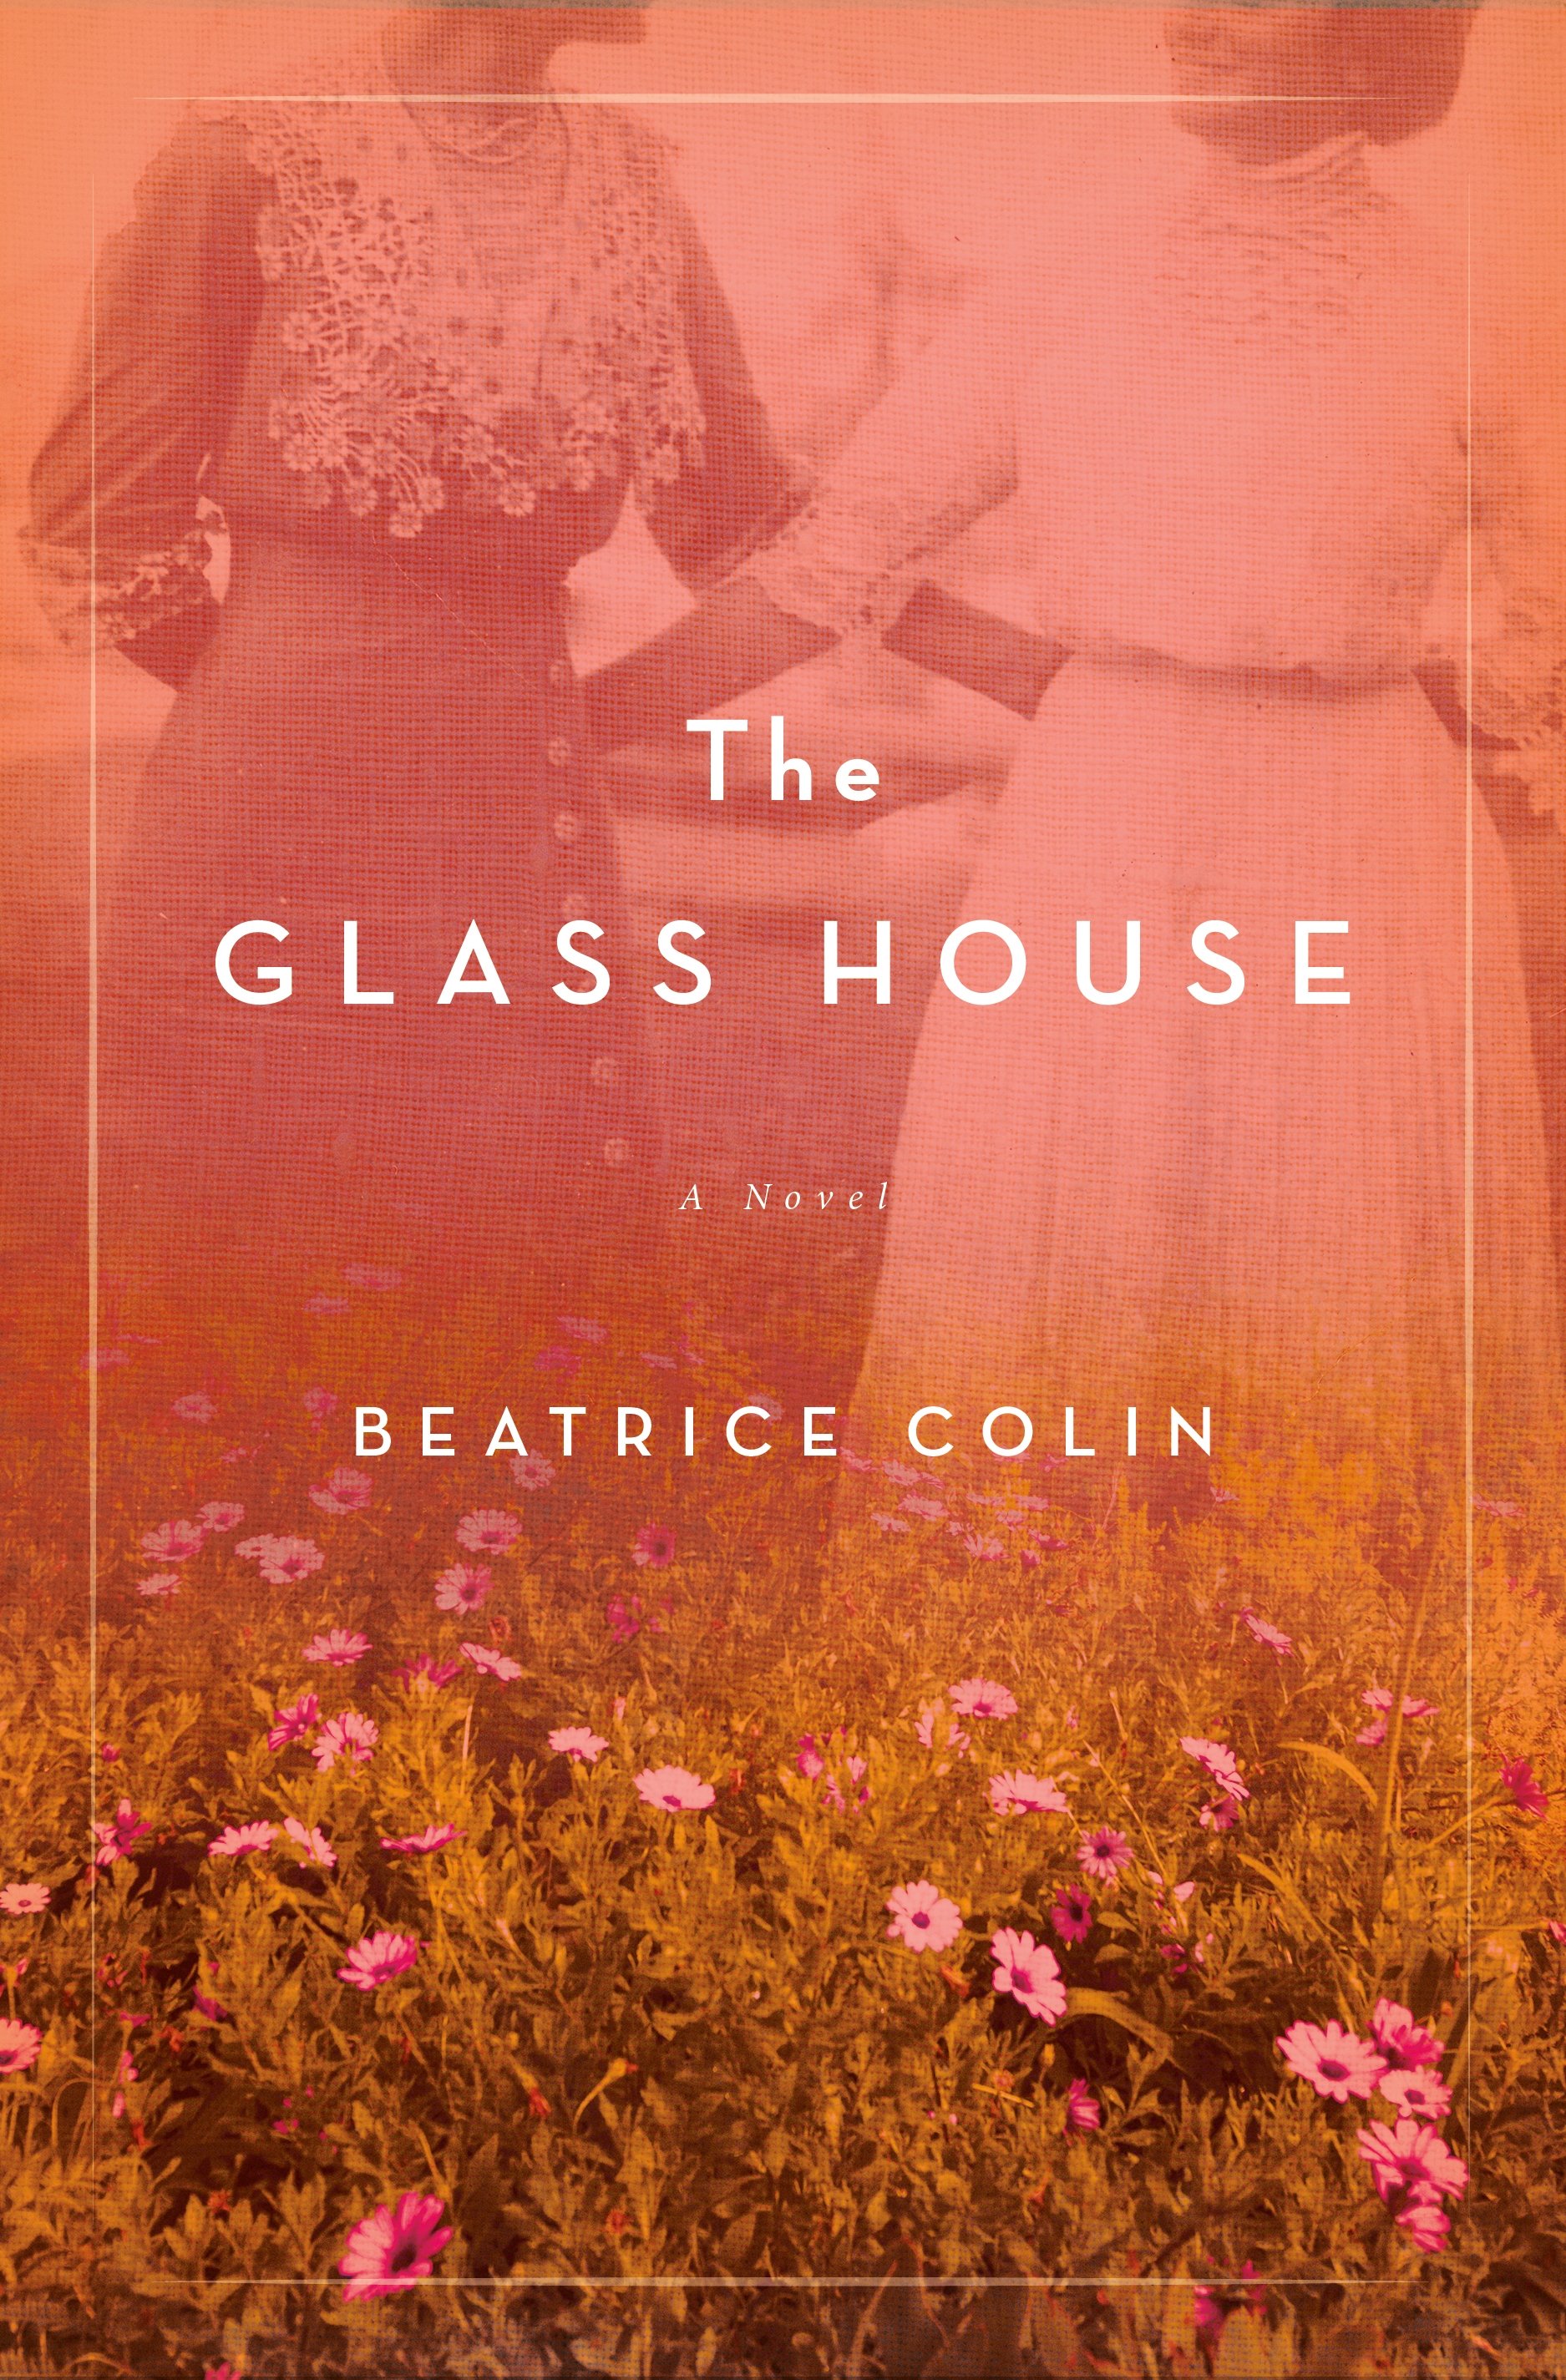 Book “The Glass House” by Beatrice Colin — September 15, 2020